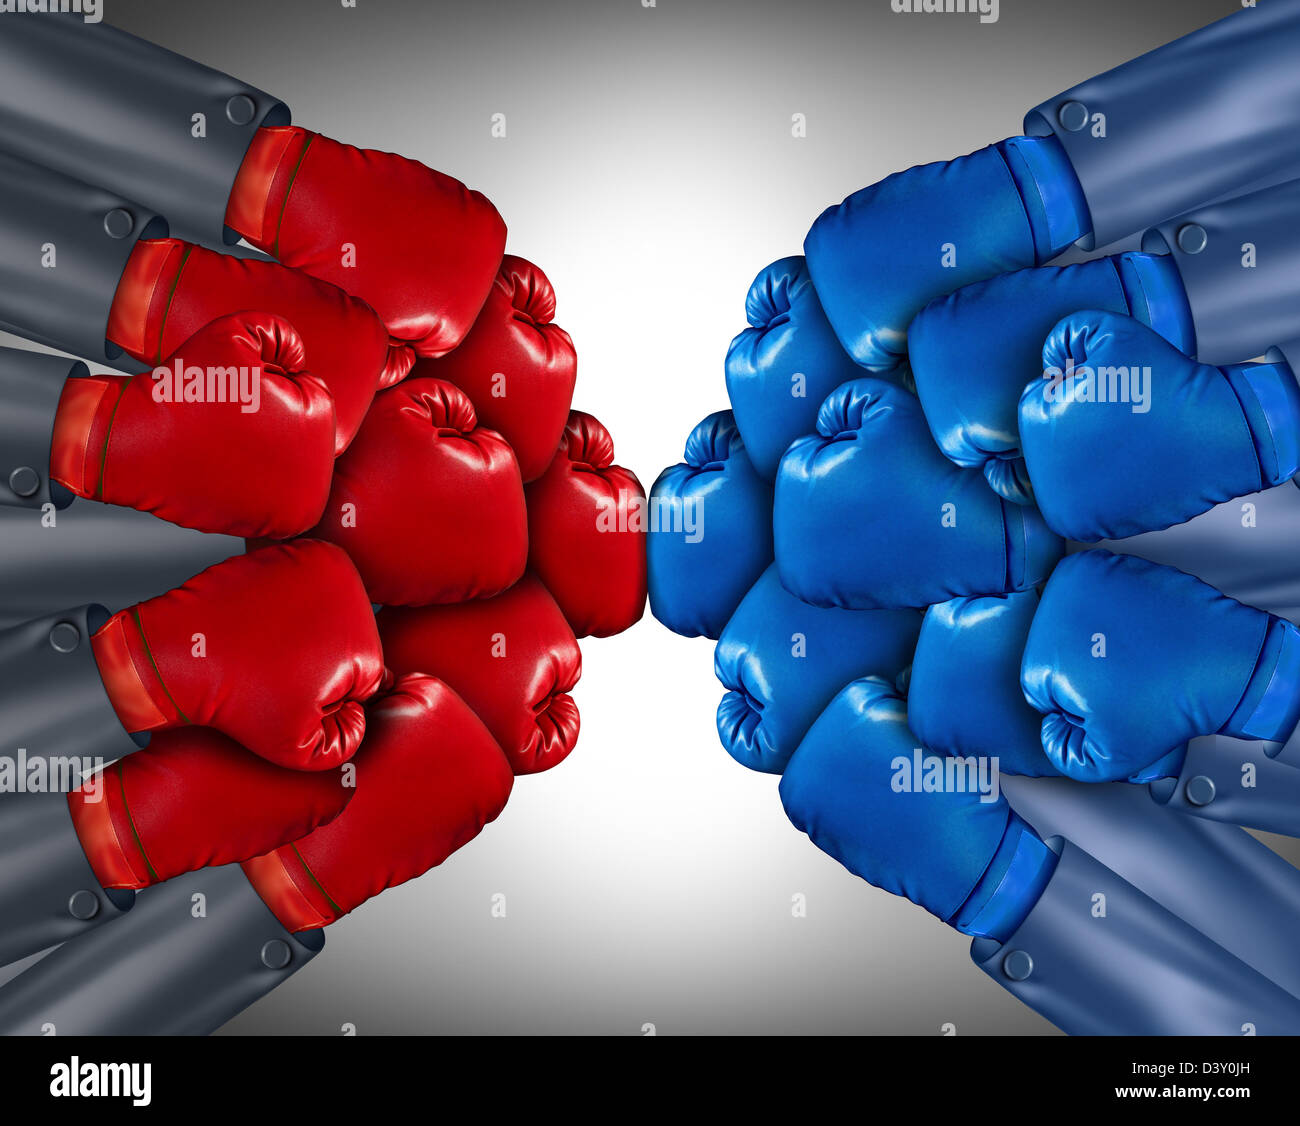 Group competition ready for a biusiness fight with a network of corporate people wearing red and blue boxing gloves competing together in the open market using strategy and planning to win. Stock Photo